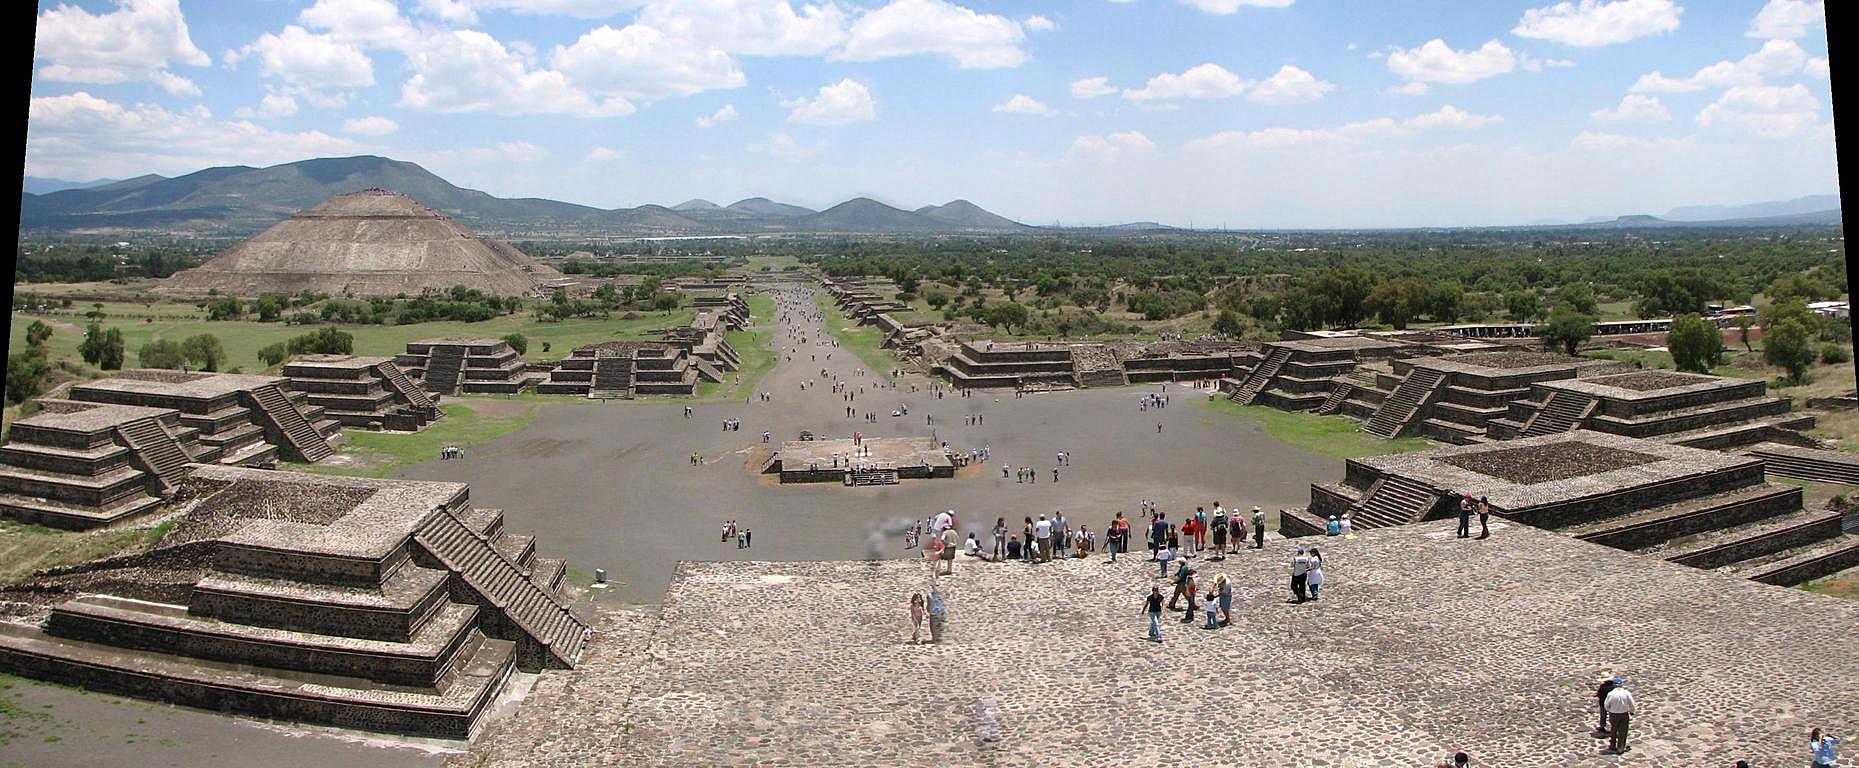 Panorama from Pyramid of The Moon